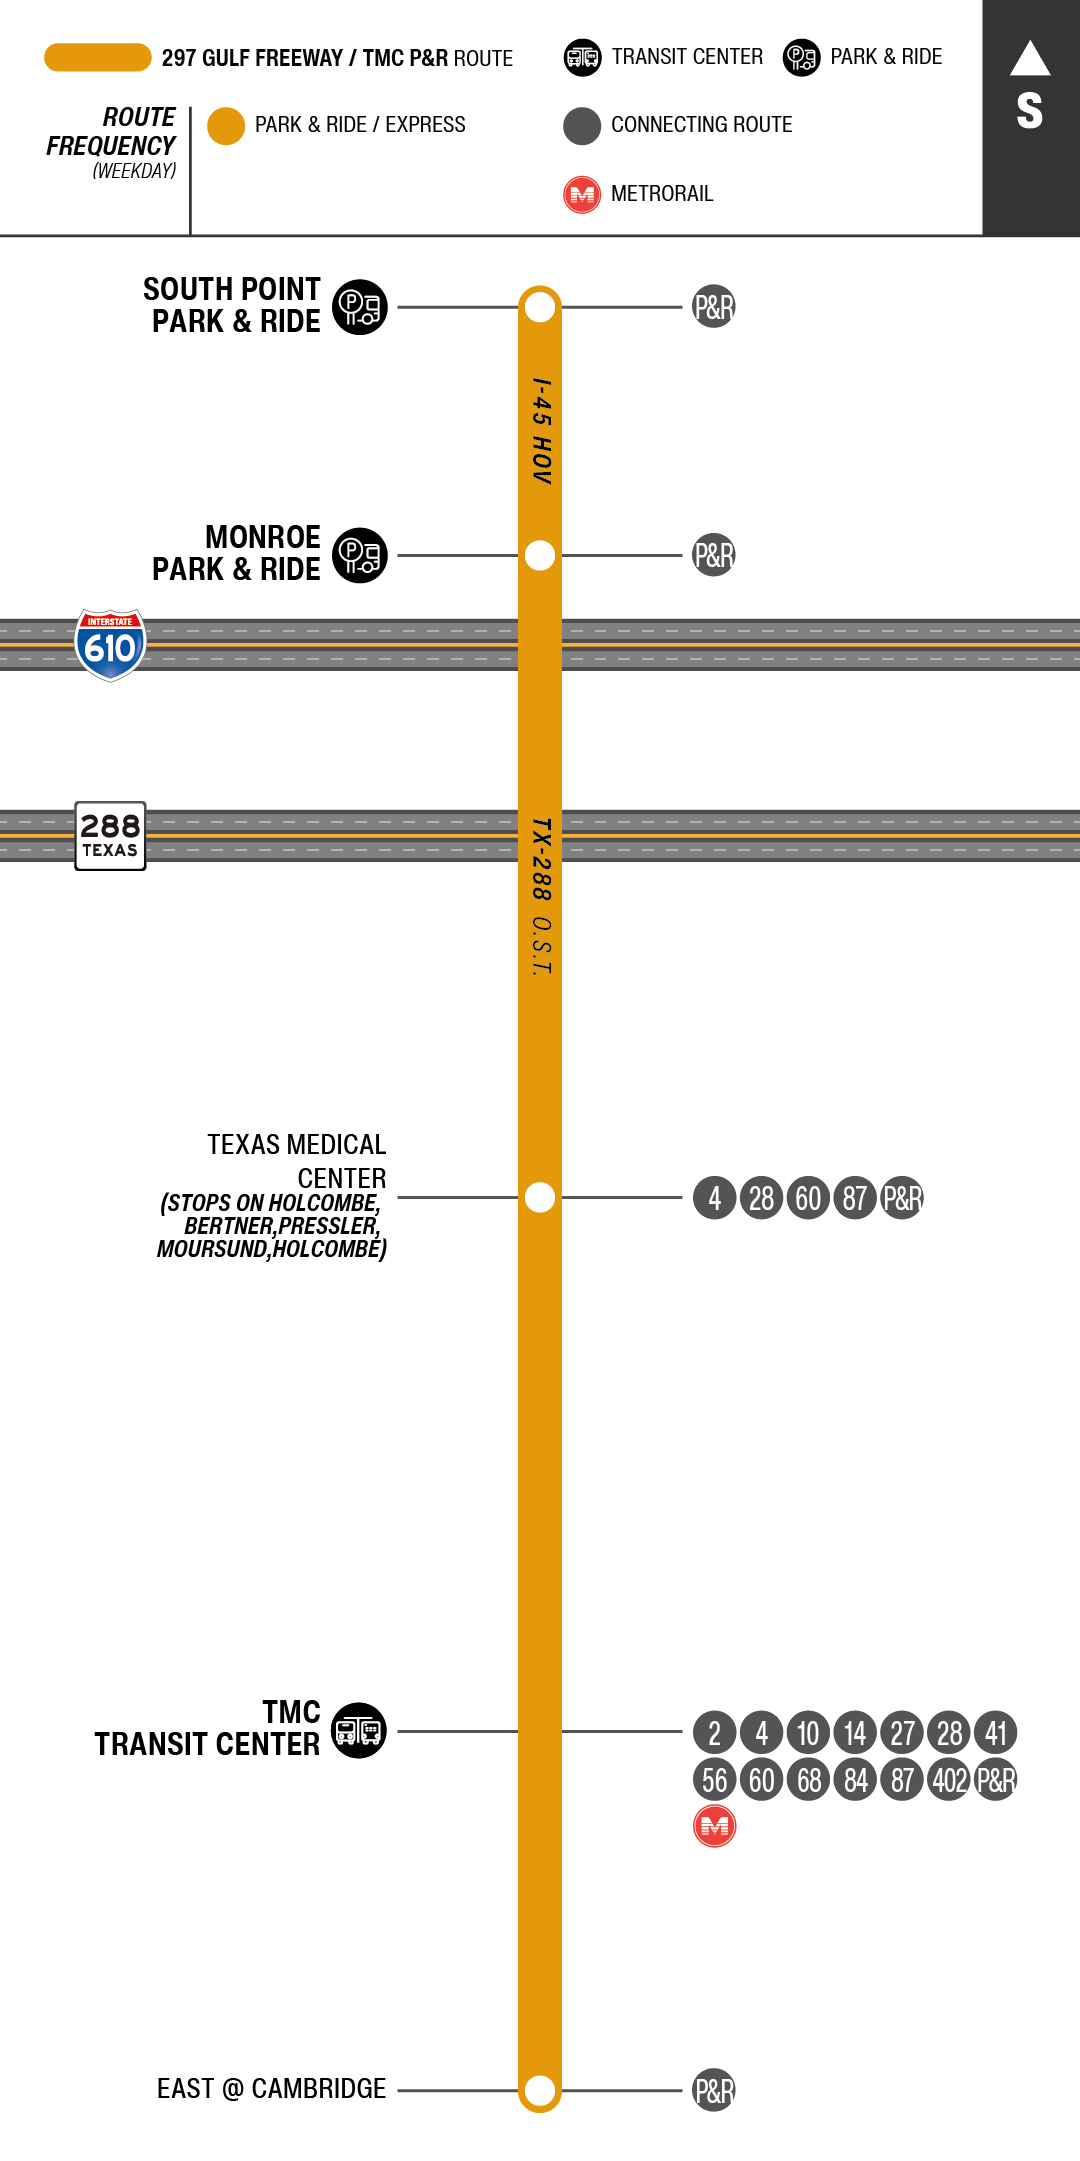 Route map for 297 Gulf Freeway / TMC Park & Ride bus